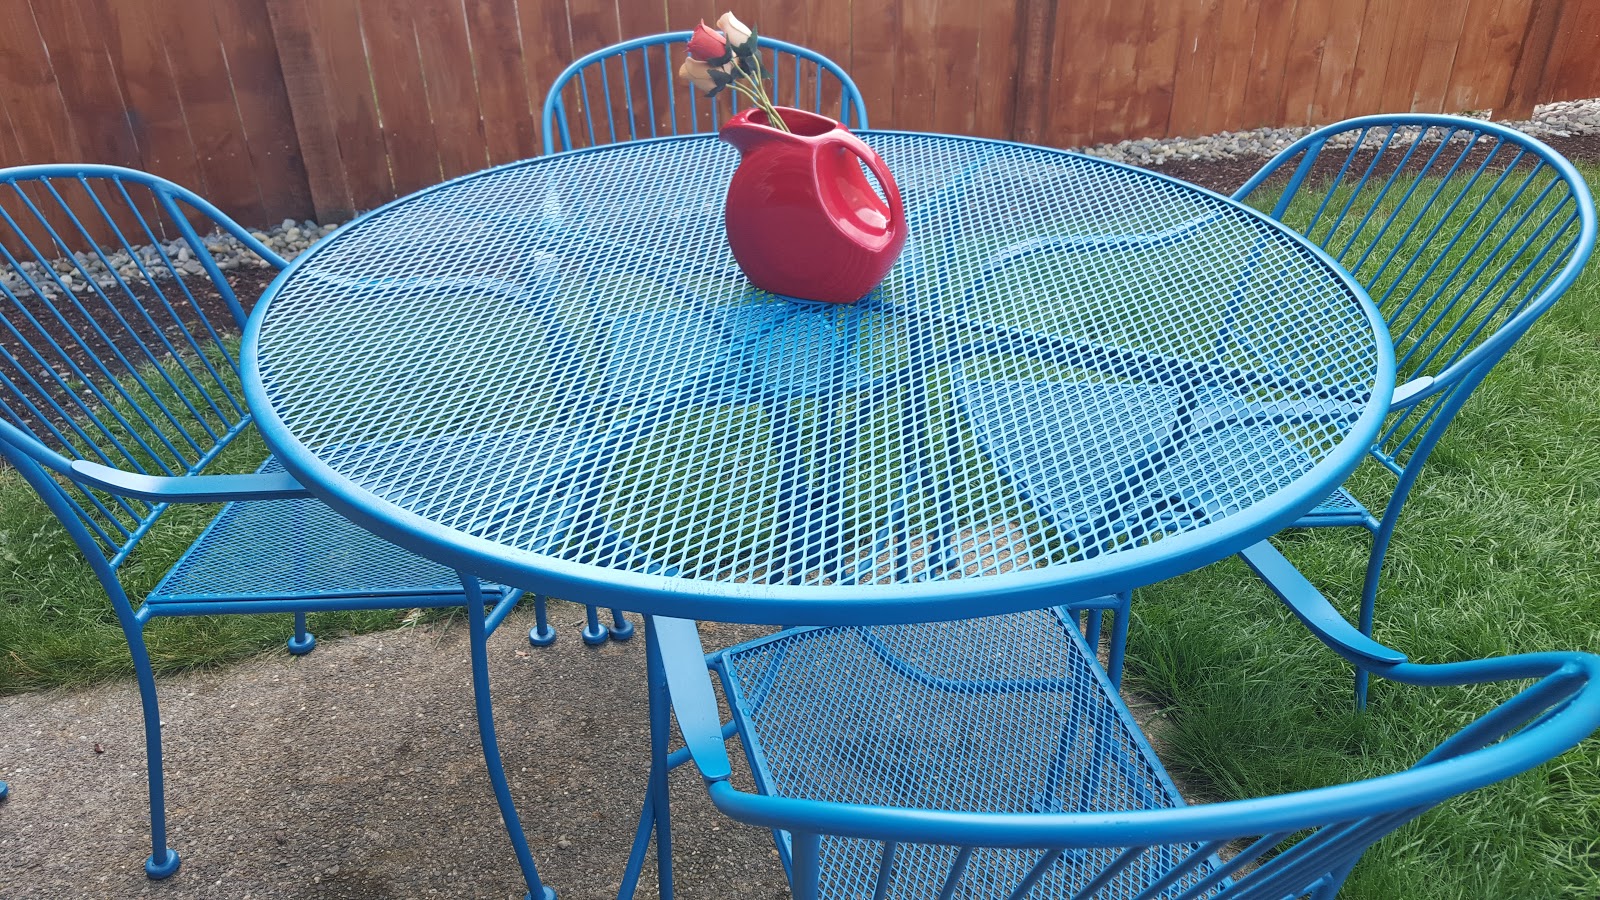 Refinish Wrought Iron Patio Furniture, What Color Should I Paint My Wrought Iron Furniture